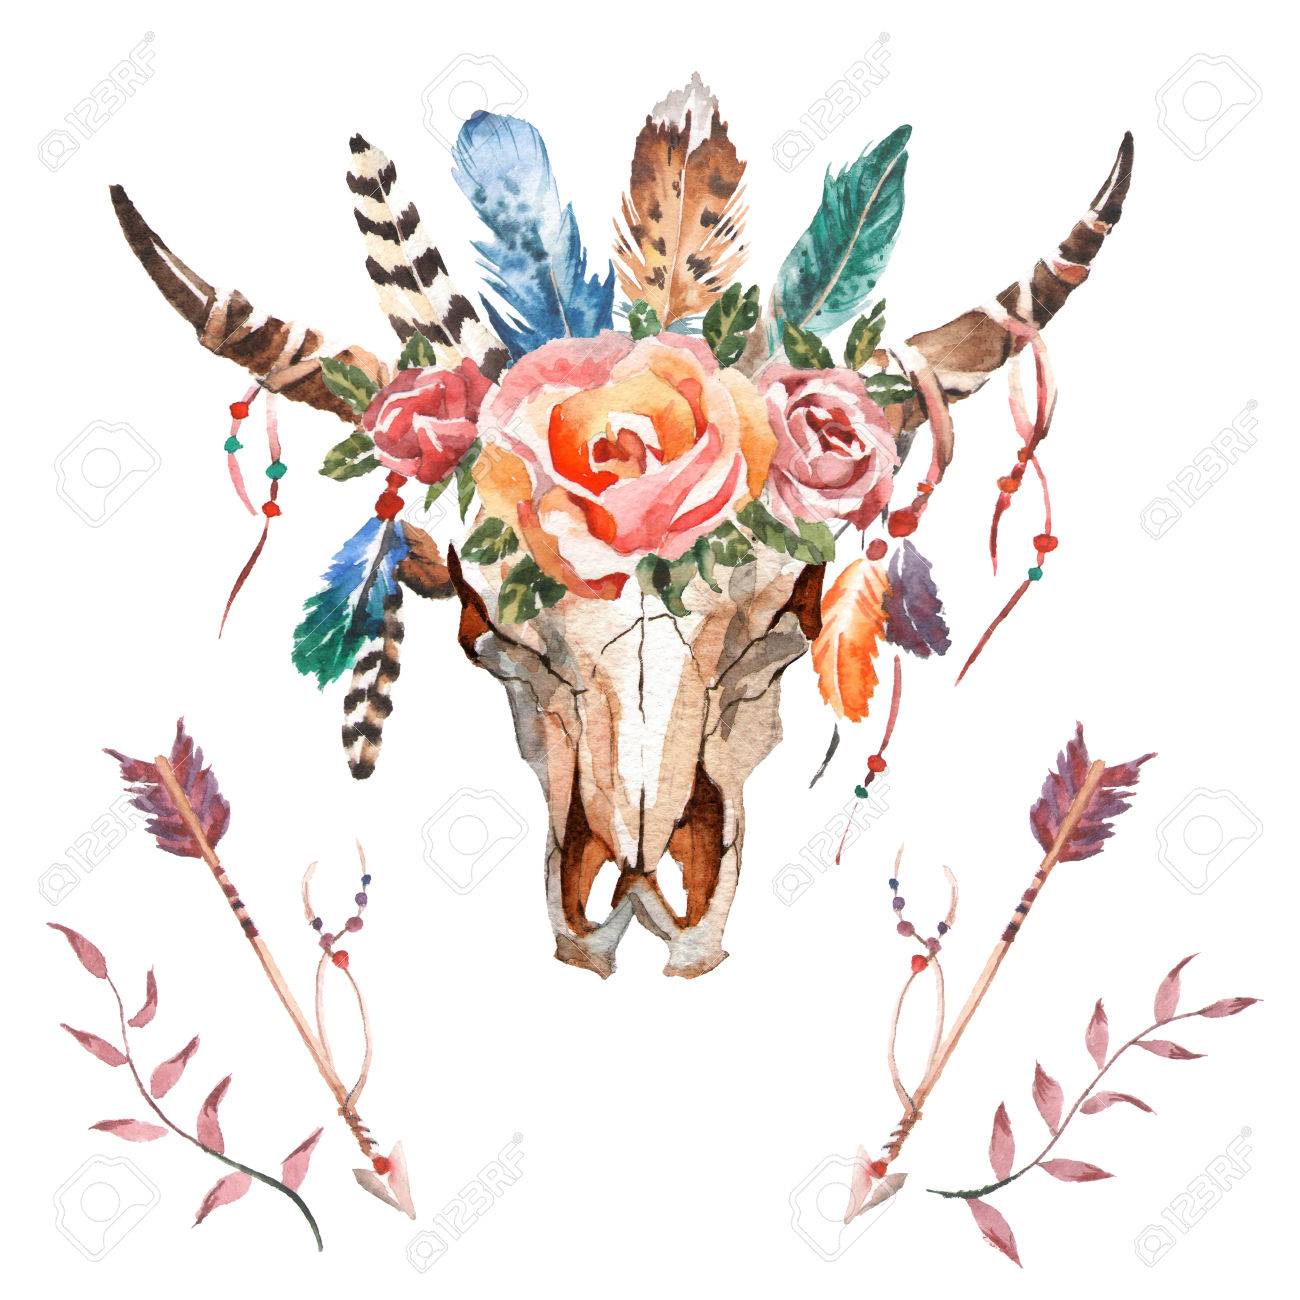 Watercolor Isolated Bull S Head With Flowers And Feathers On